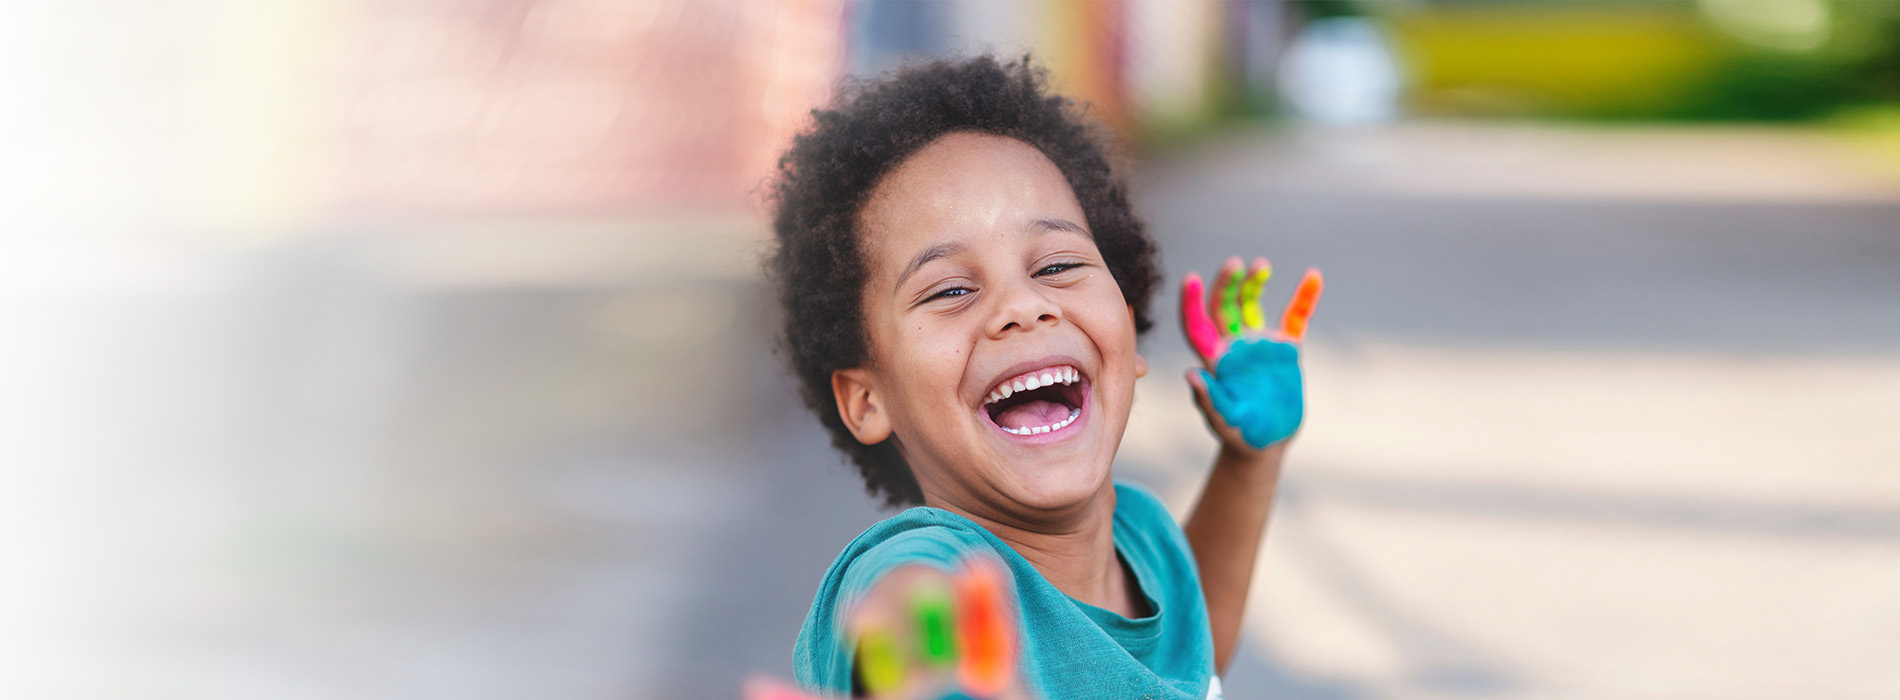 A young child joyfully laughing and holding a colorful object, set against an outdoor backdrop.